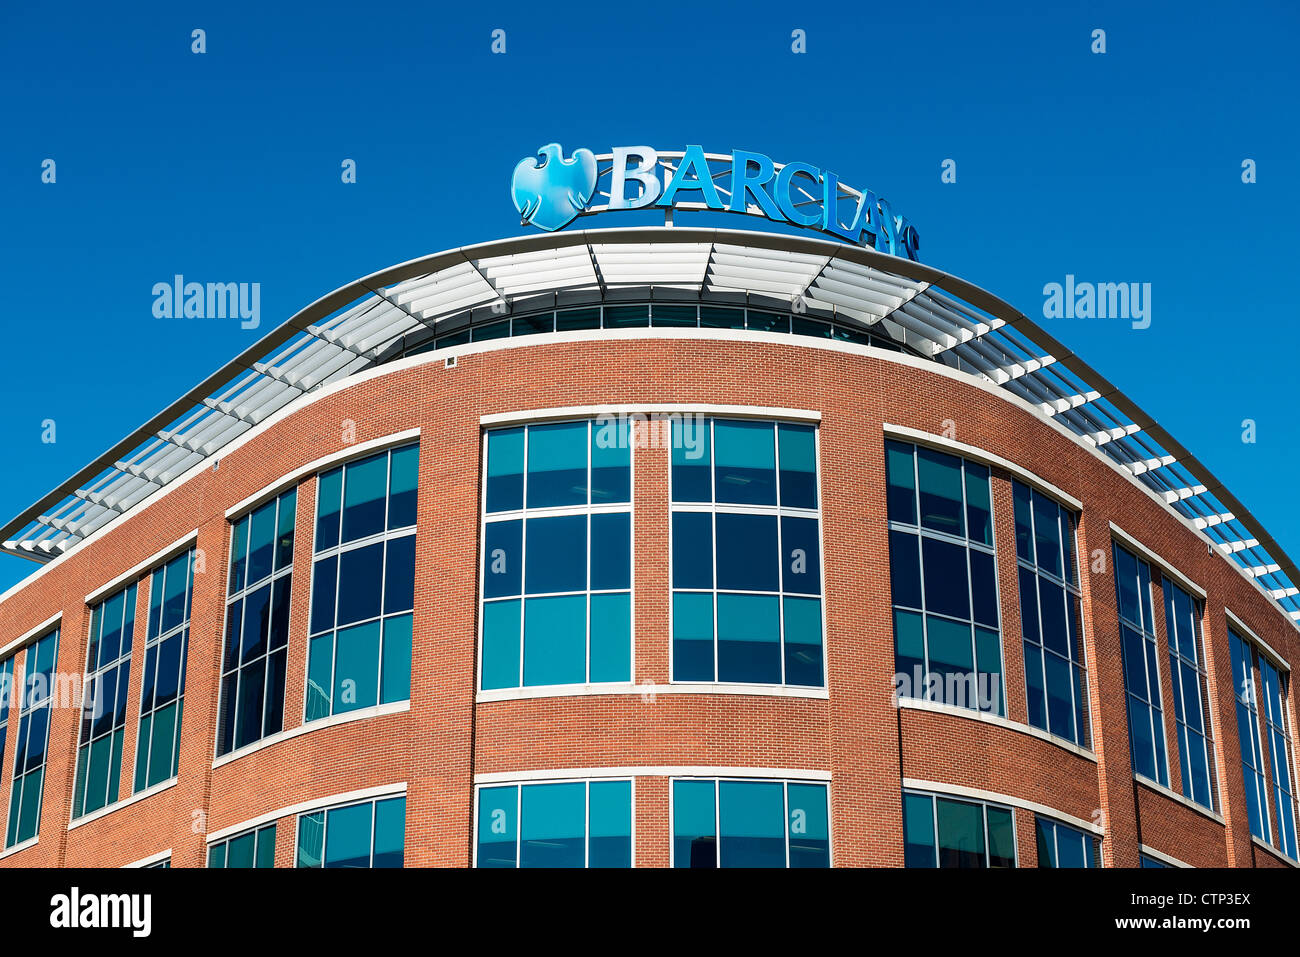 Barclays corporate offices, Wilmington, Delaware, usa Banque D'Images